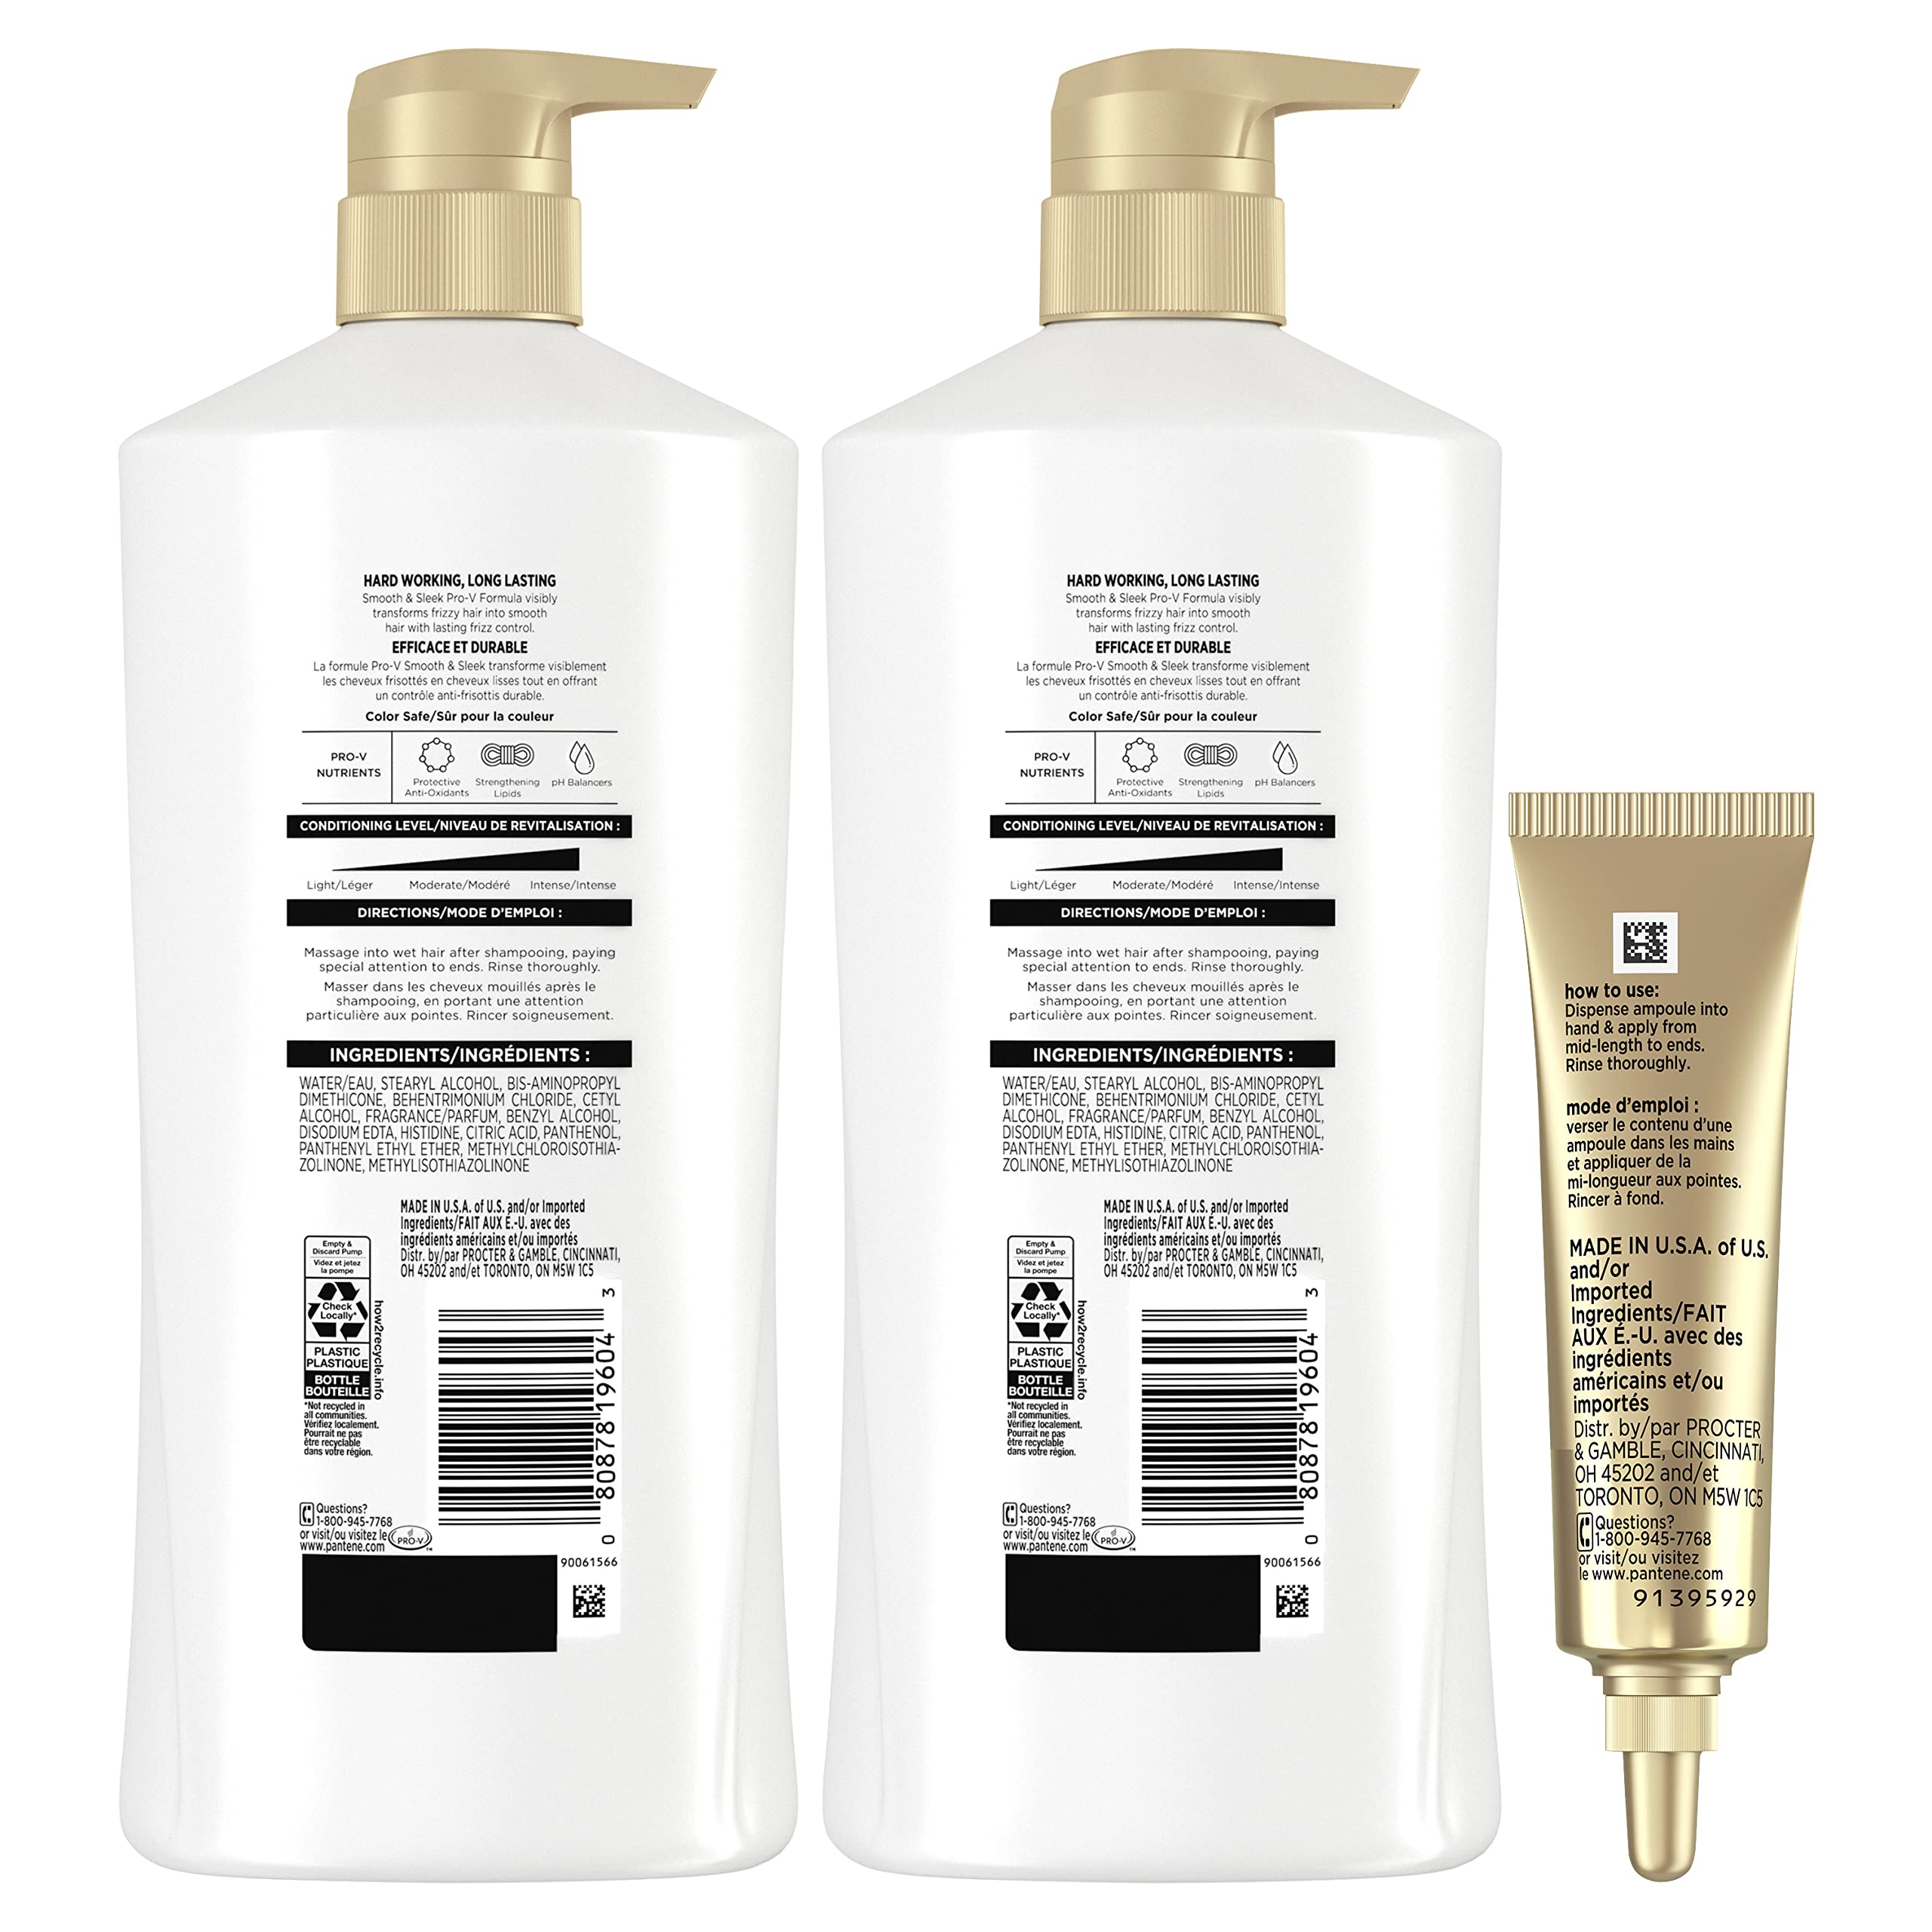 Pantene Conditioner Twin Pack with Hair Treatment Set, Smooth and Sleek for Frizz Control, Safe for Color-Treated Hair